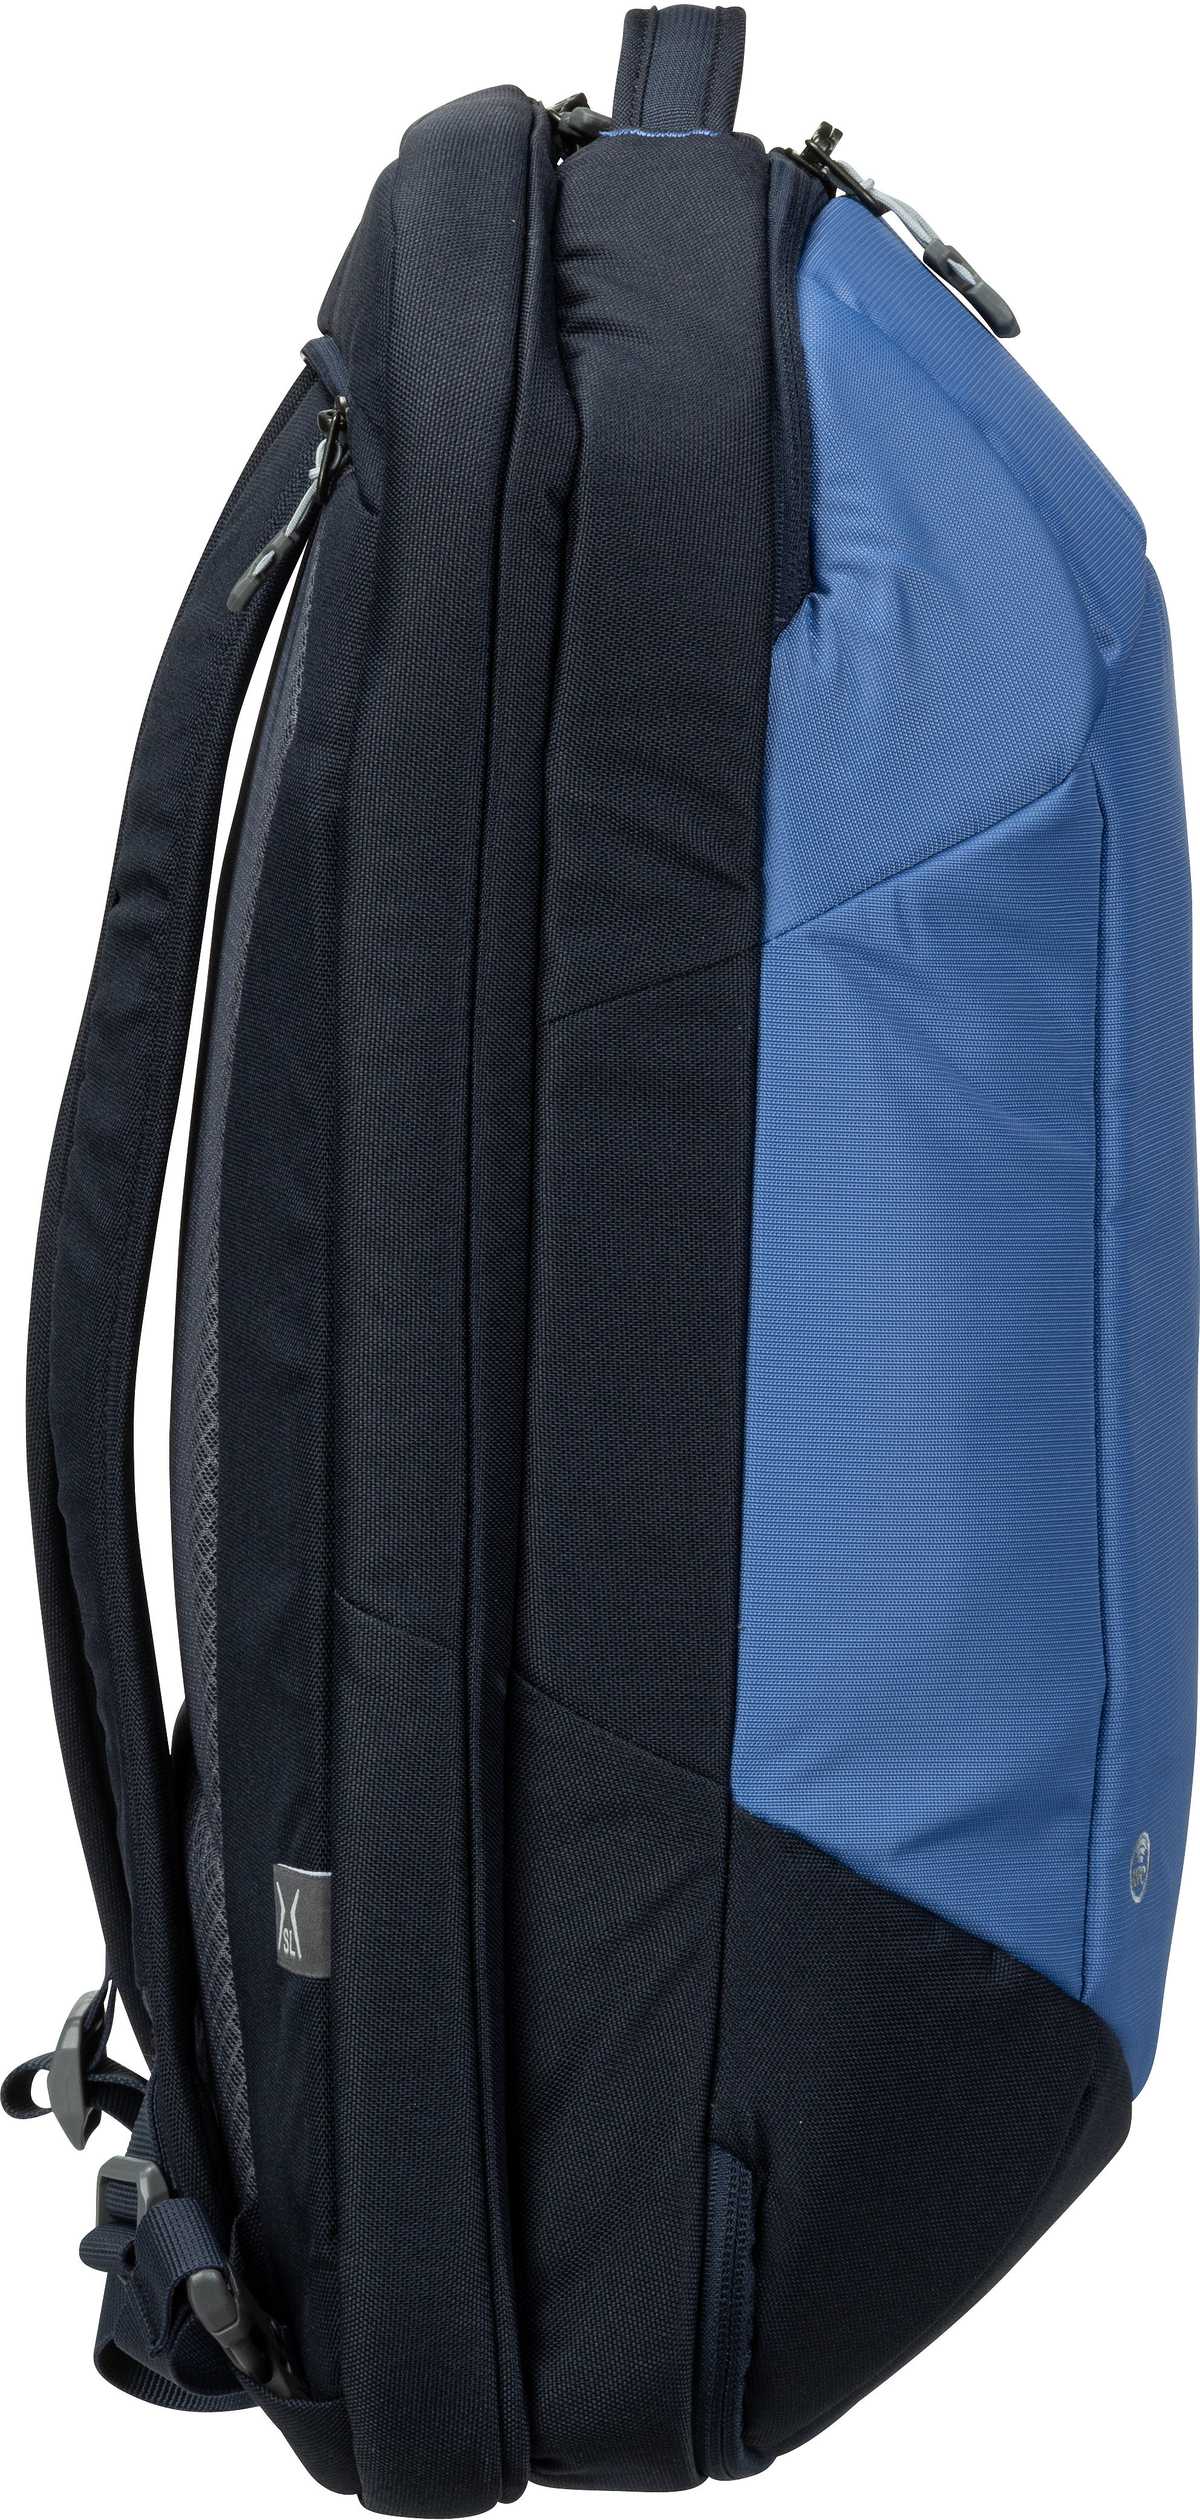 Deuter Aviant Carry On 28 SL - Pacific/Ink